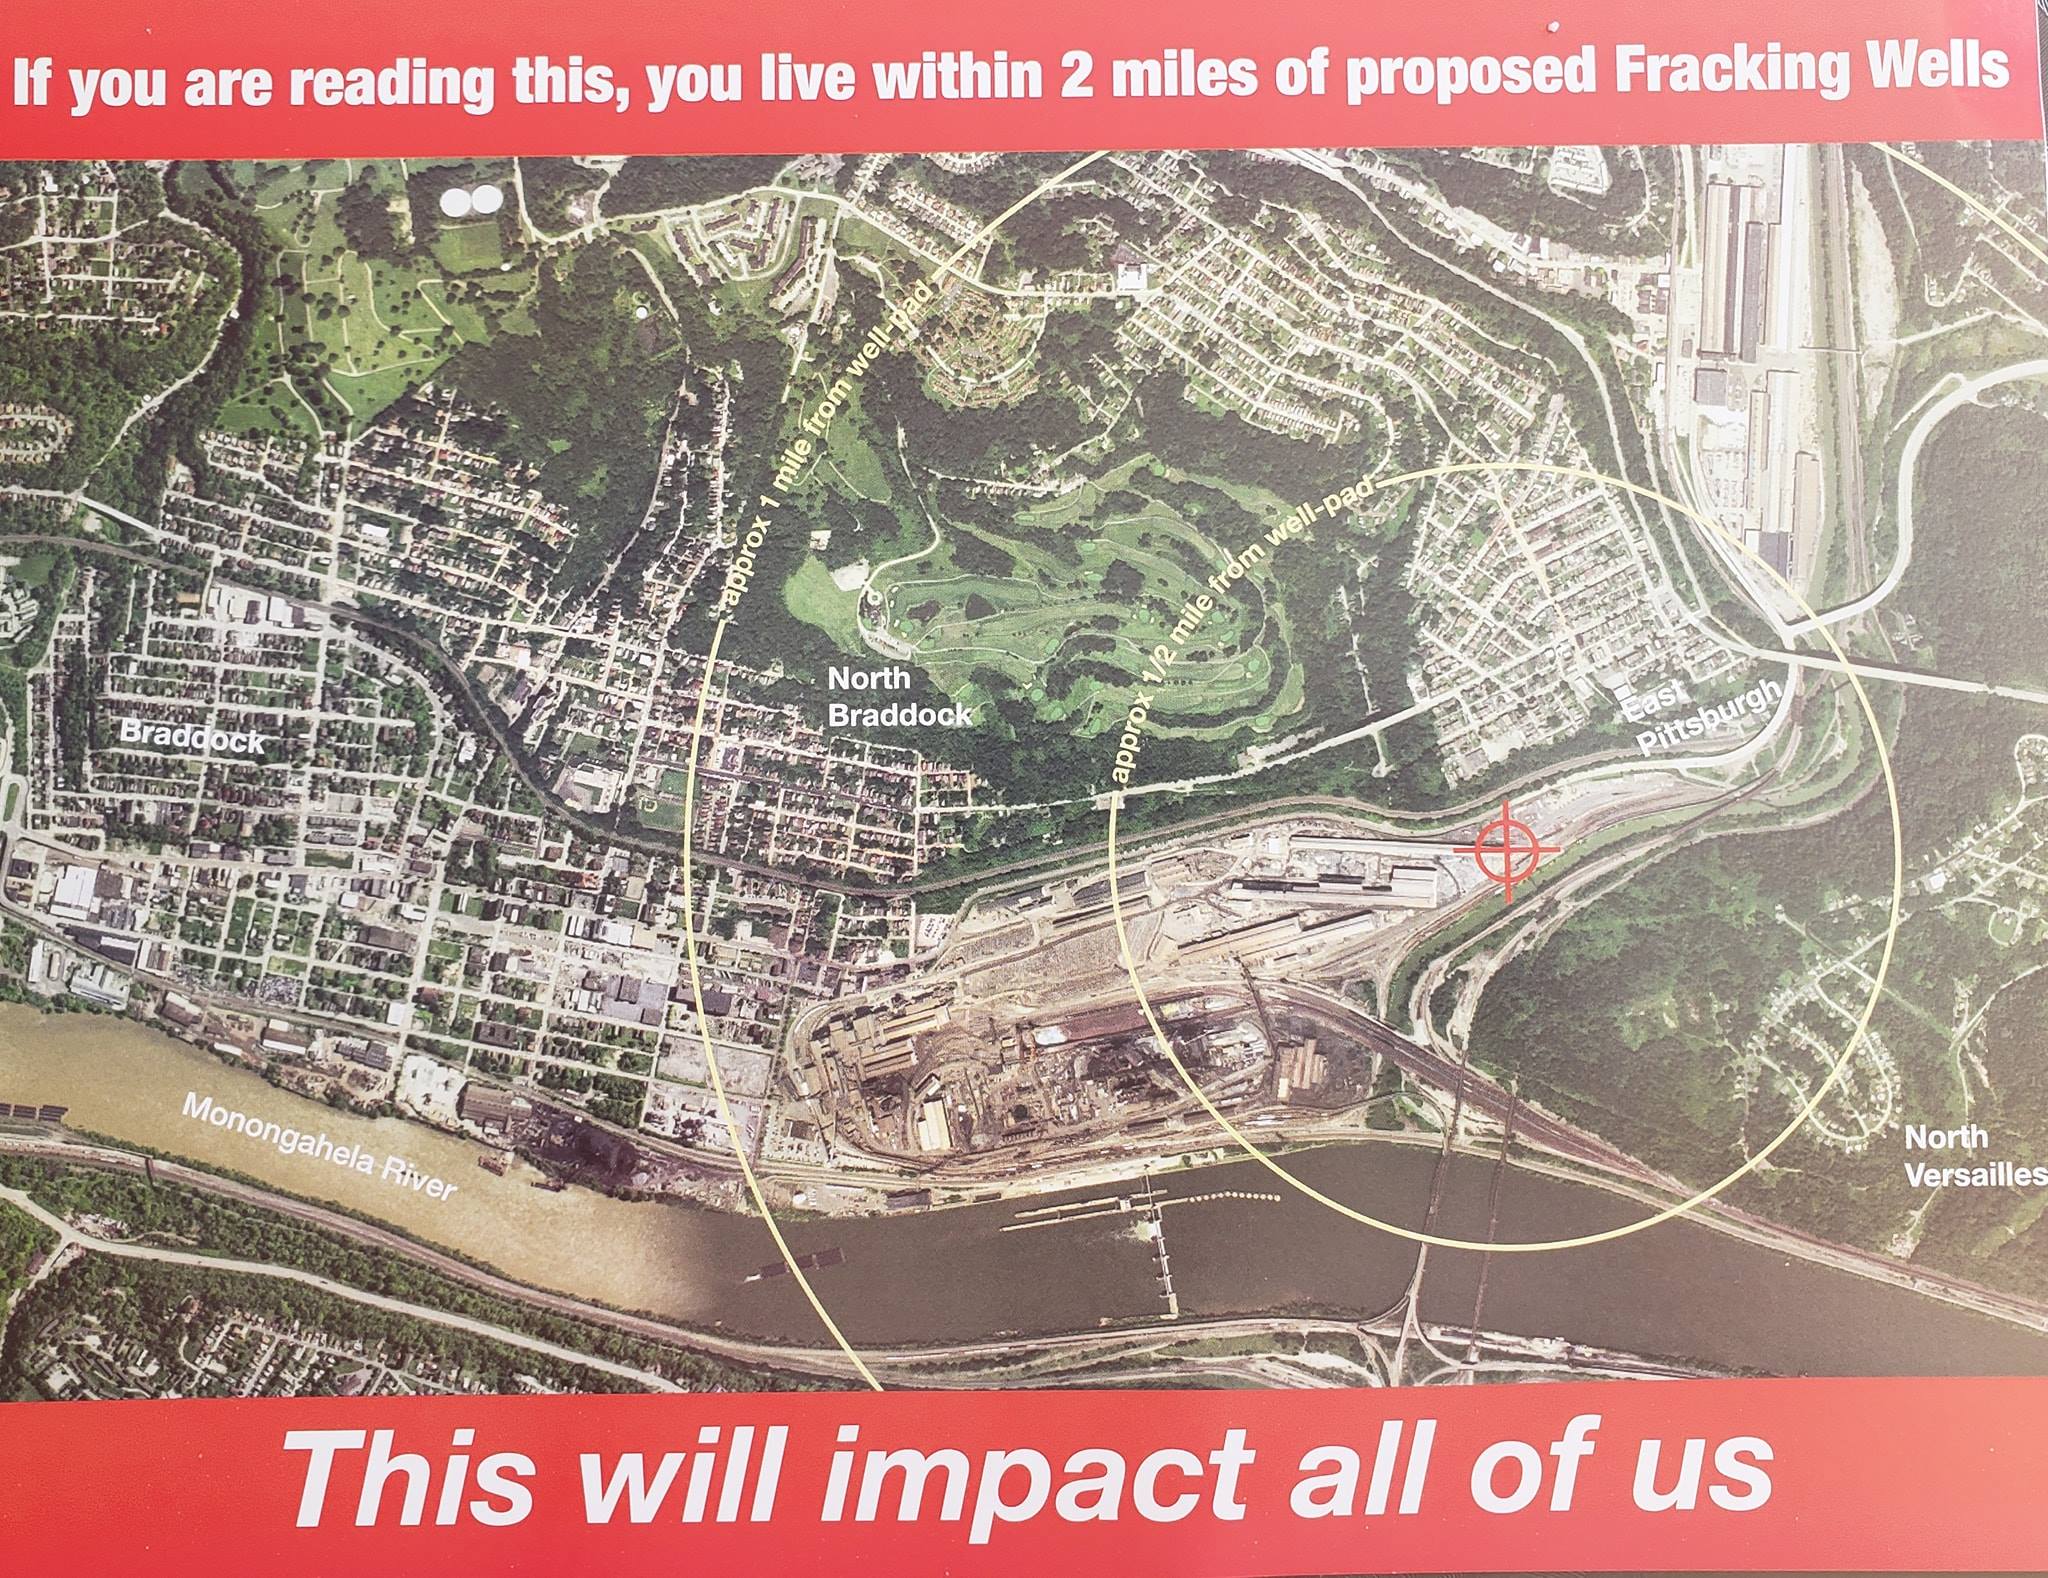 Map indicating the proposed fracking site at Edgar Thomson Plant and its two-mile radius which encompasses densely populated areas